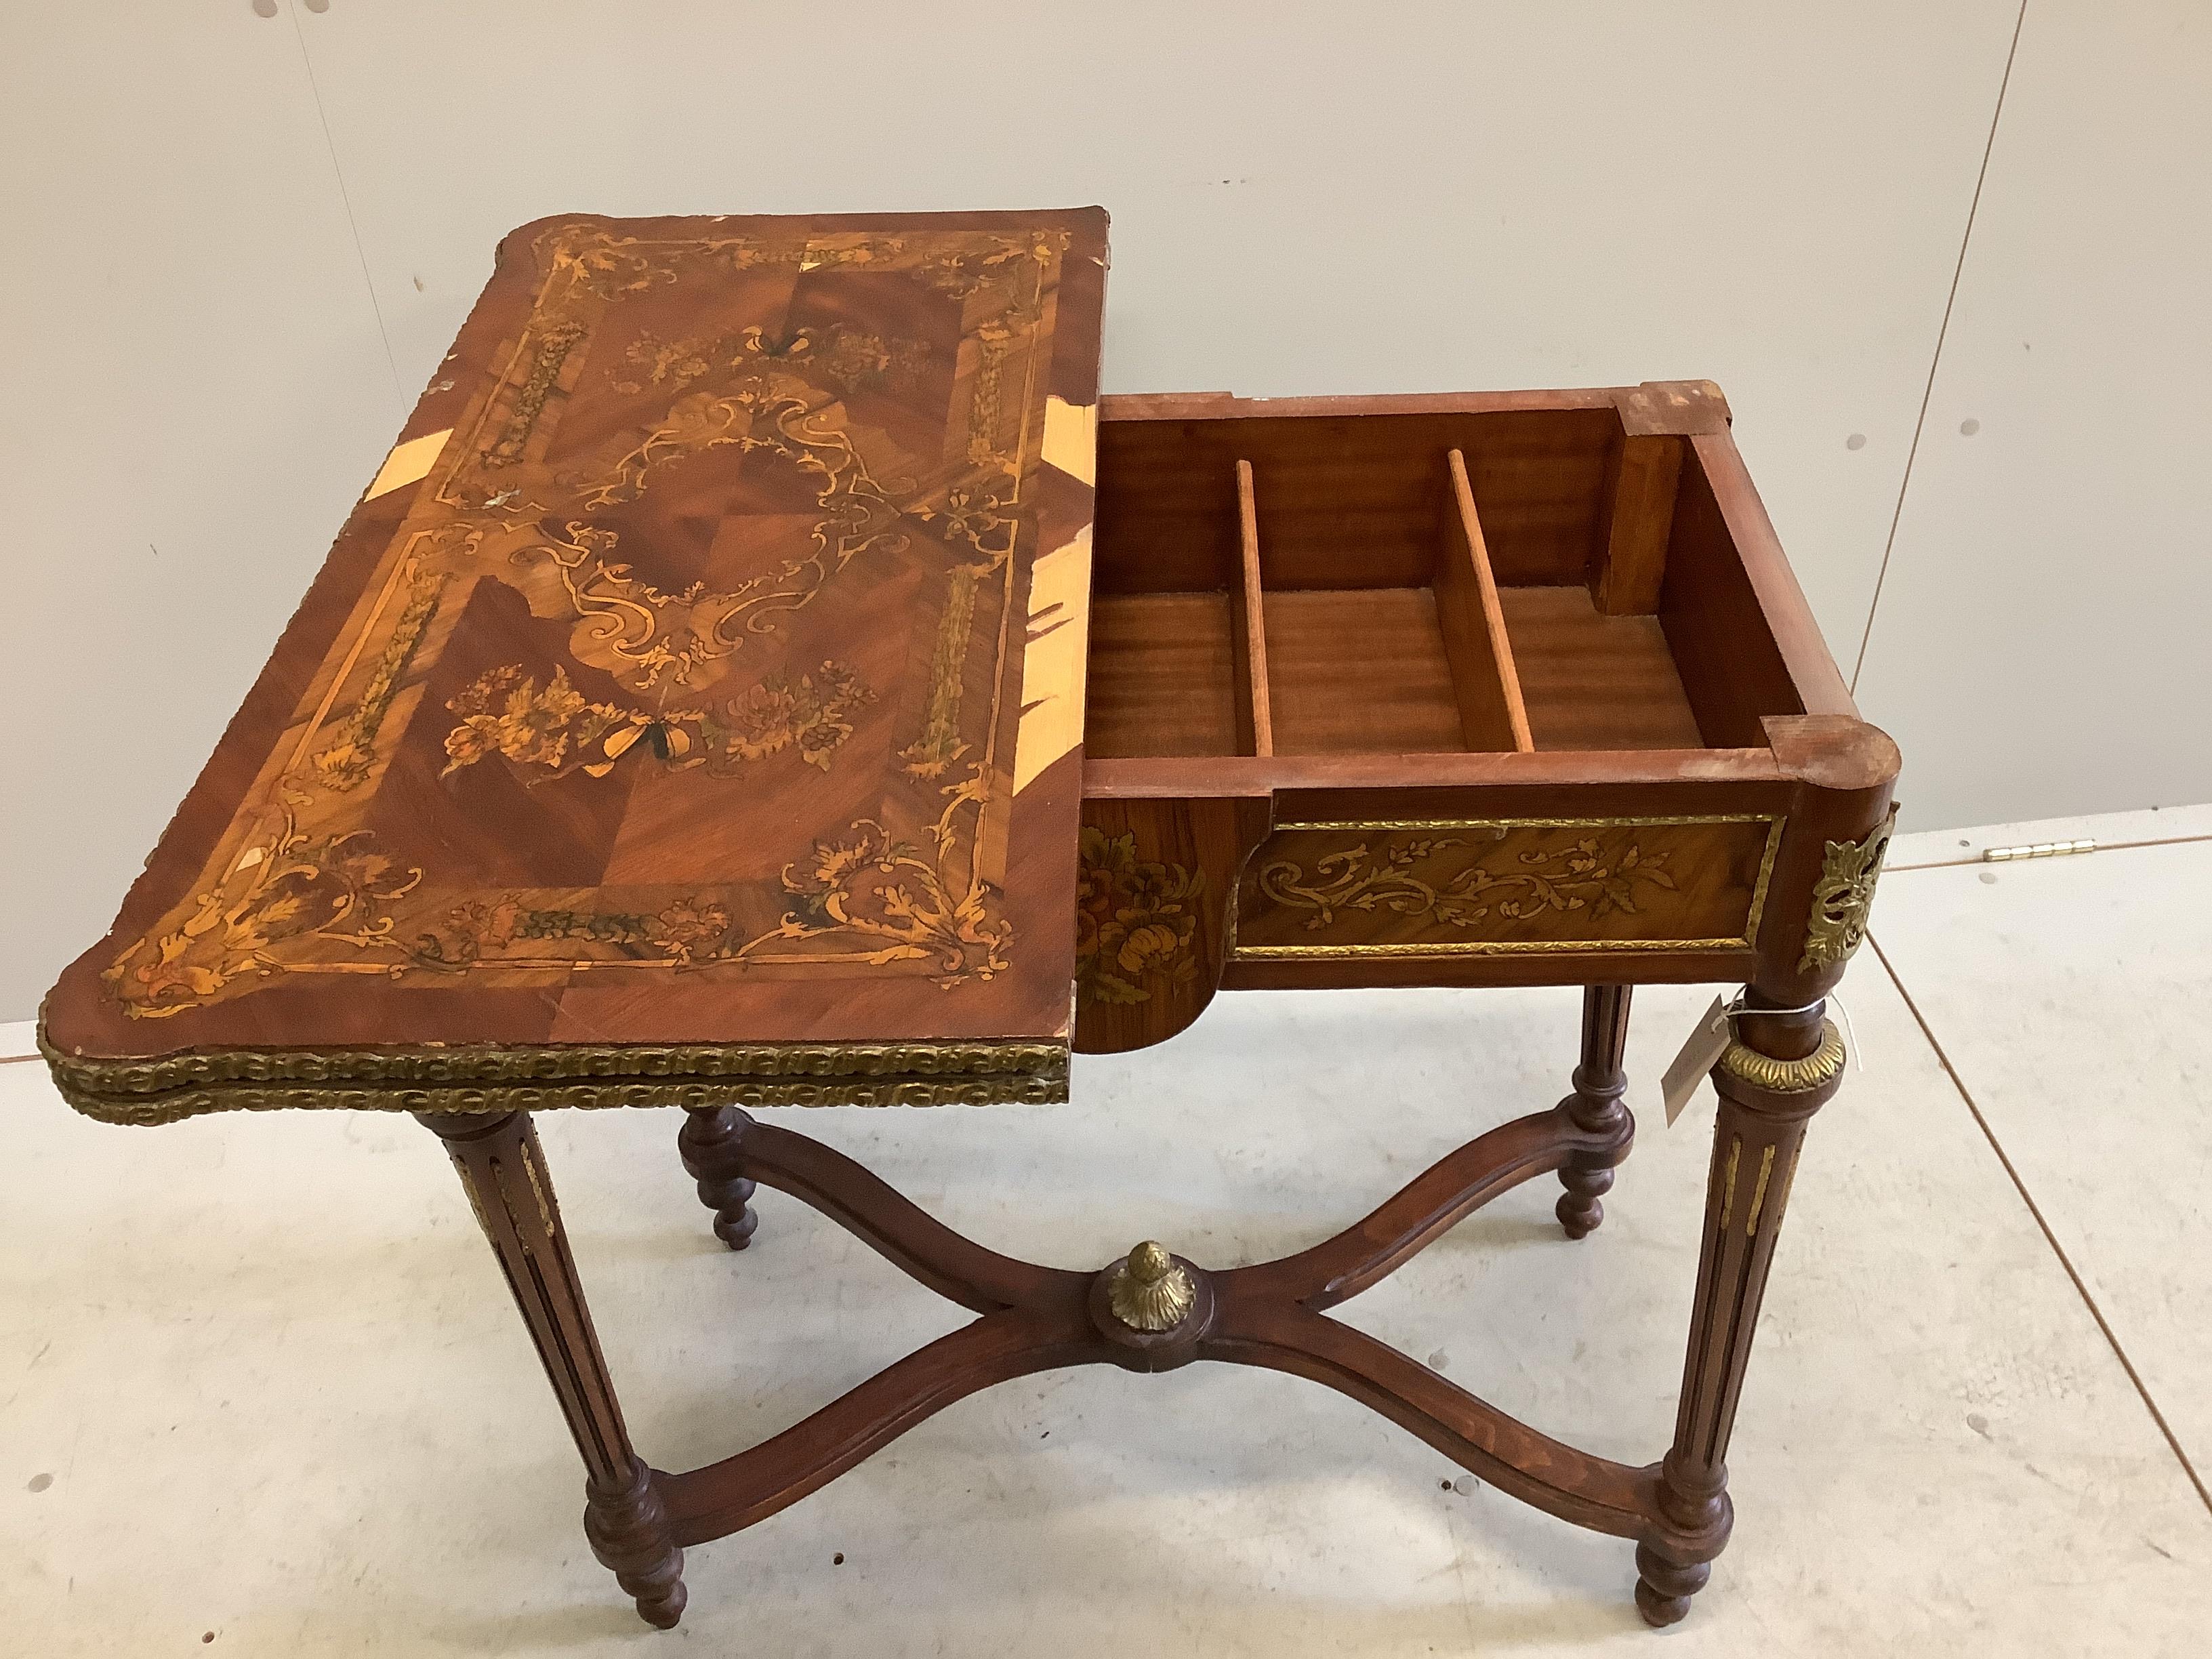 A Louis XVI style gilt metal mounted and marquetry inlaid folding card table, width 77cm, depth 40cm, height 78cm